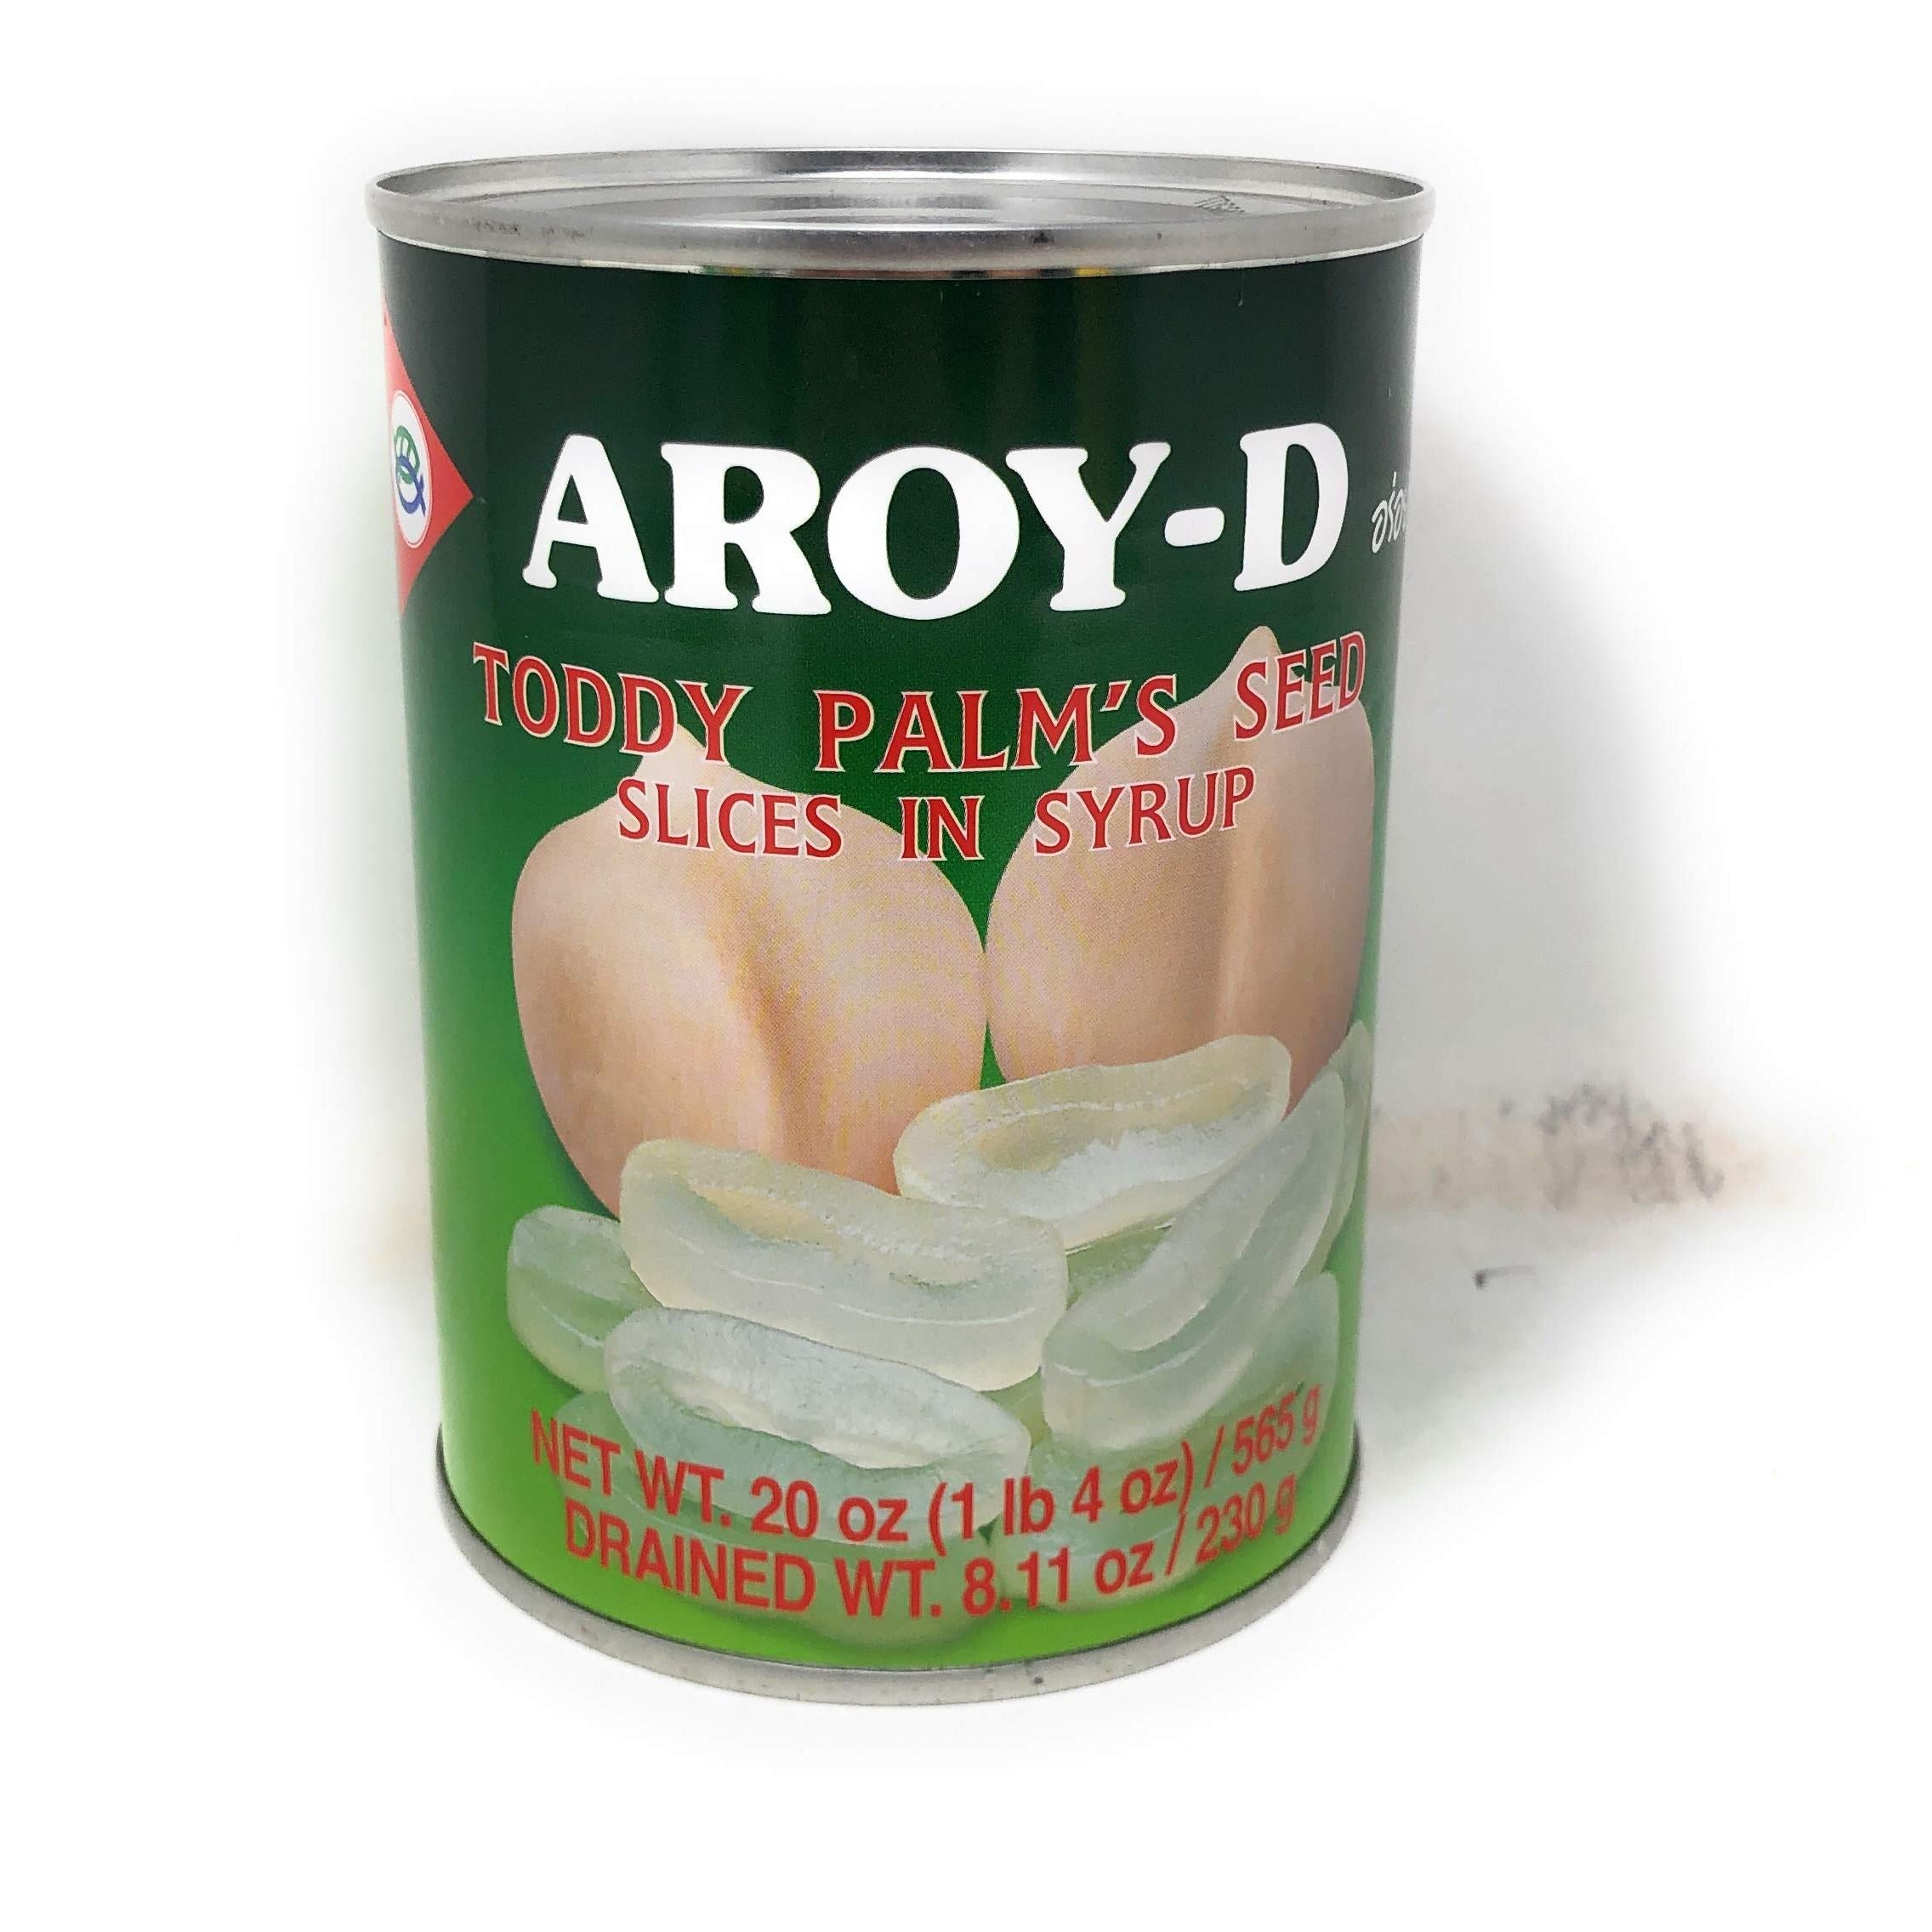 Aroy-D Palms Seed Slices In Heavy Syrup, 20oz (565g)